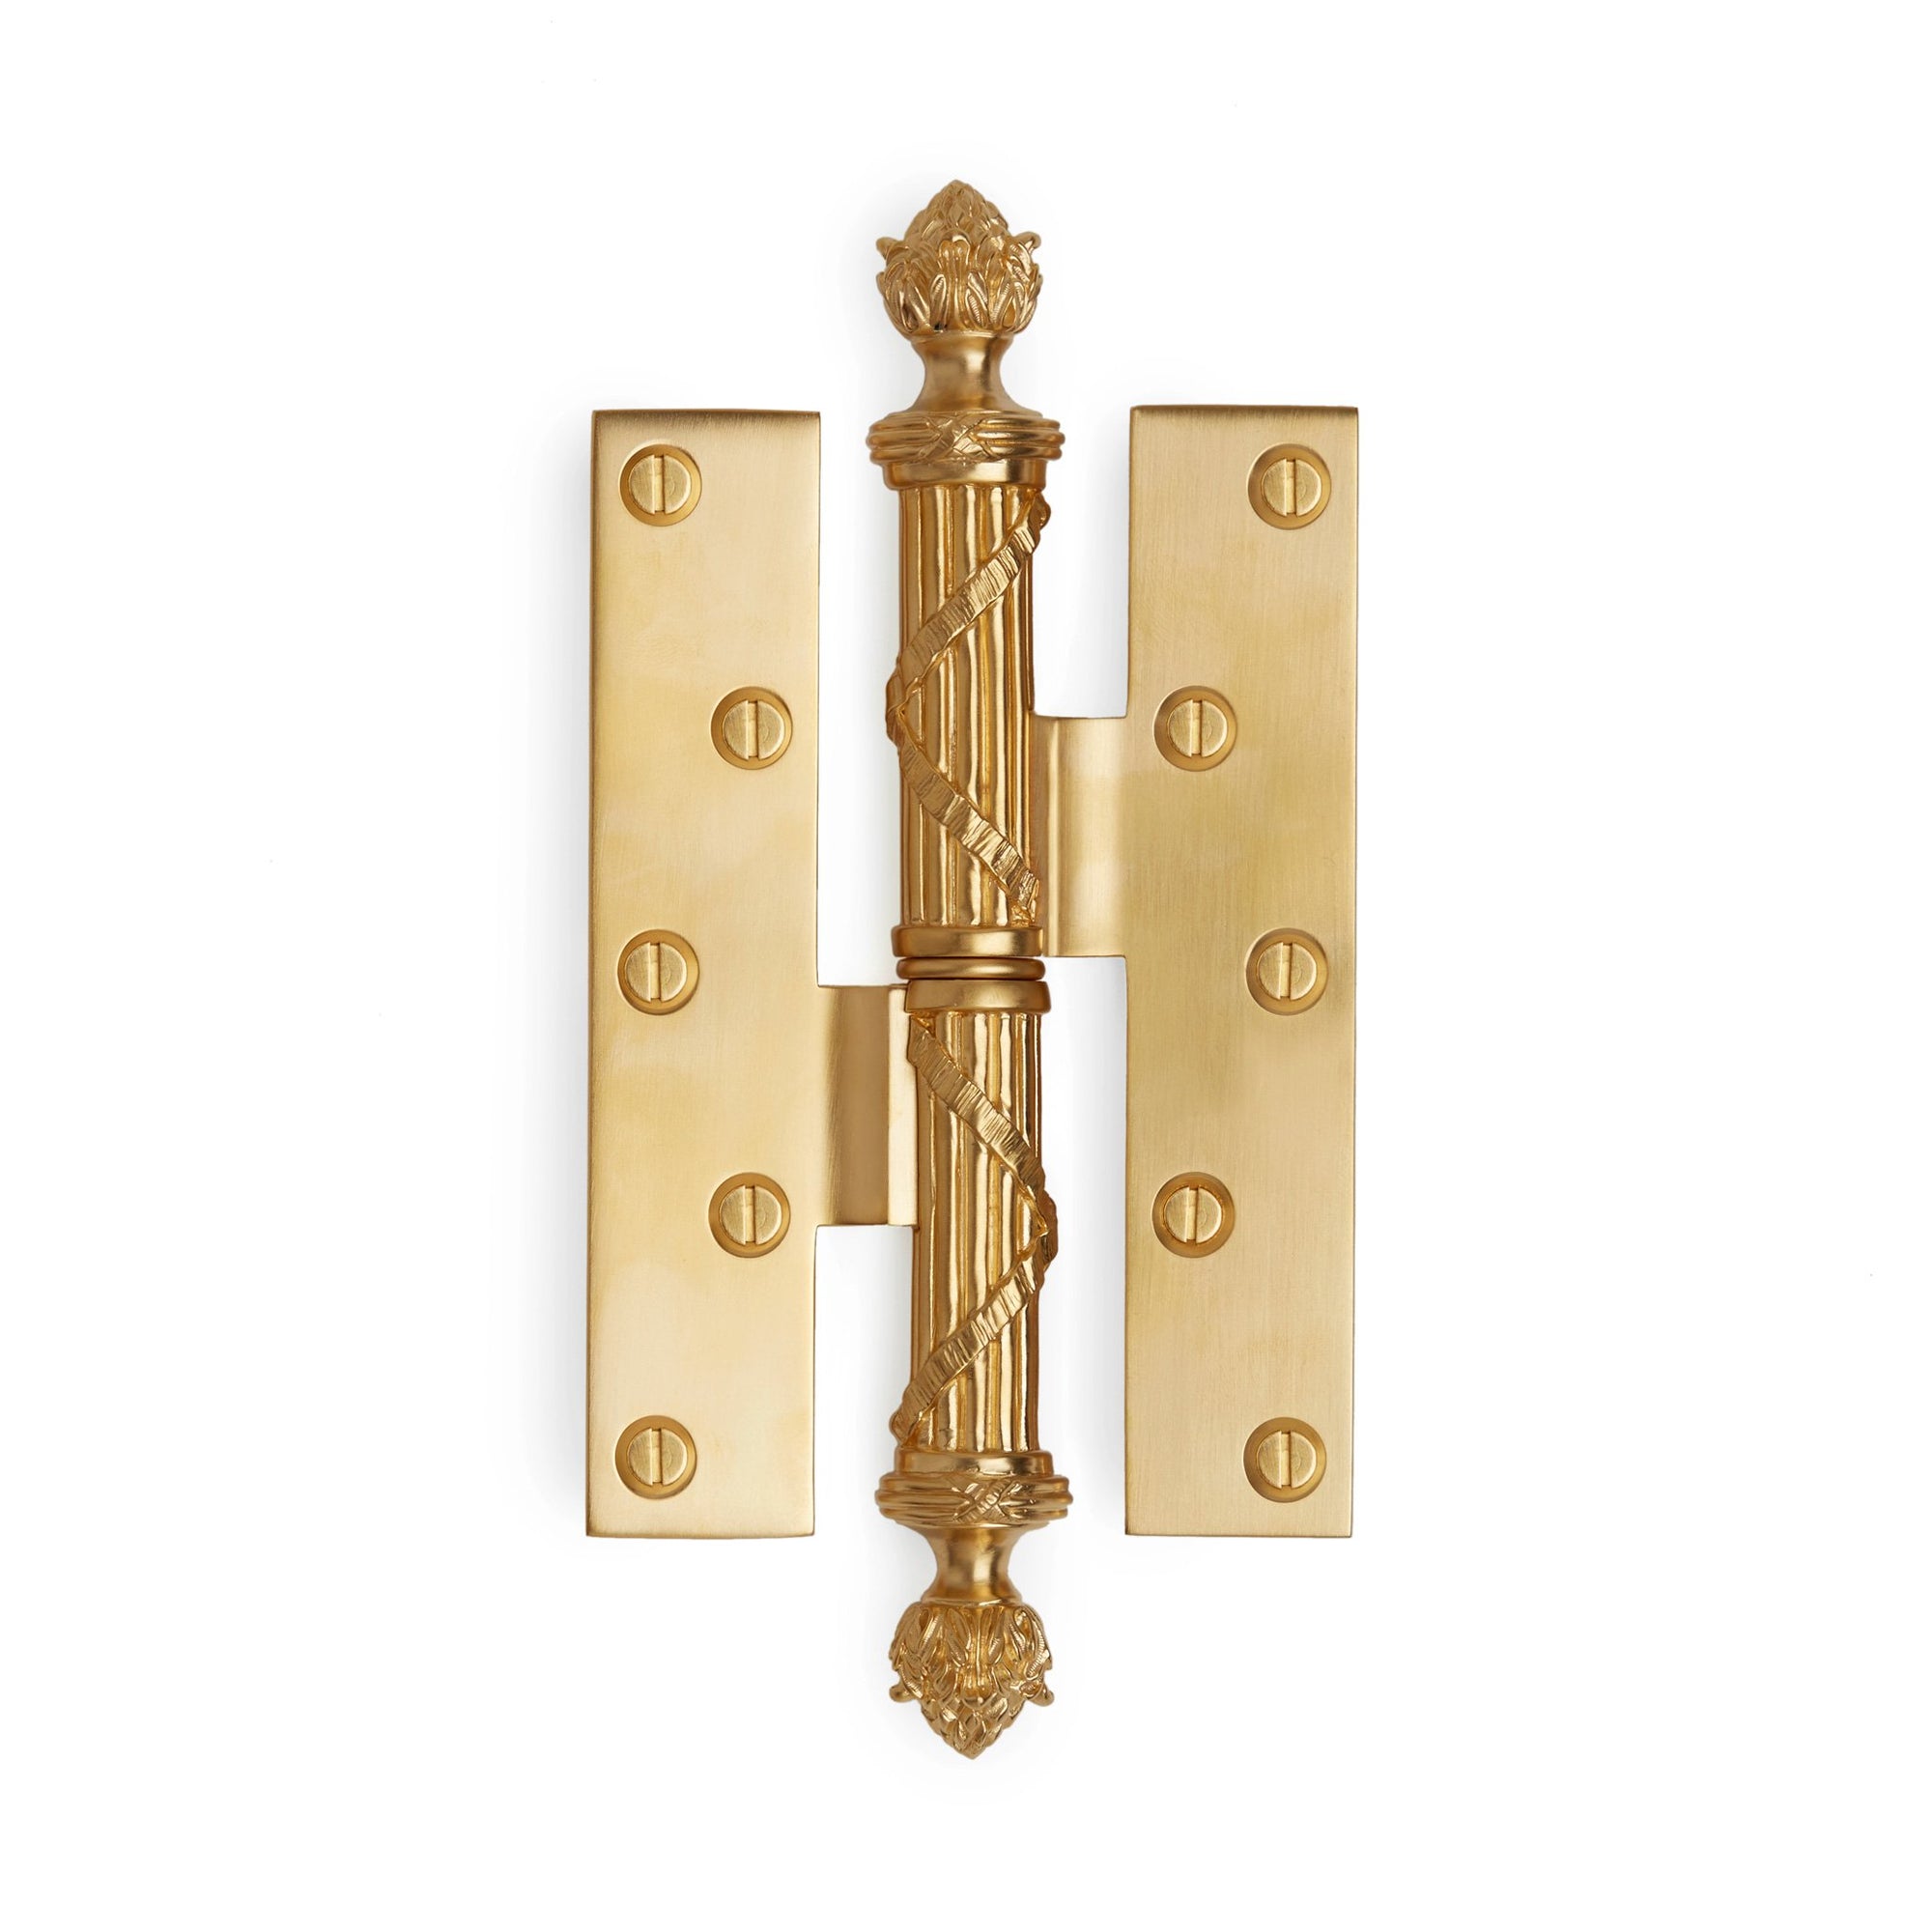 1037-HD-ZZ-GP Sherle Wagner International Ribbon & Reed Paumelle Hinge in Gold Plate metal finish